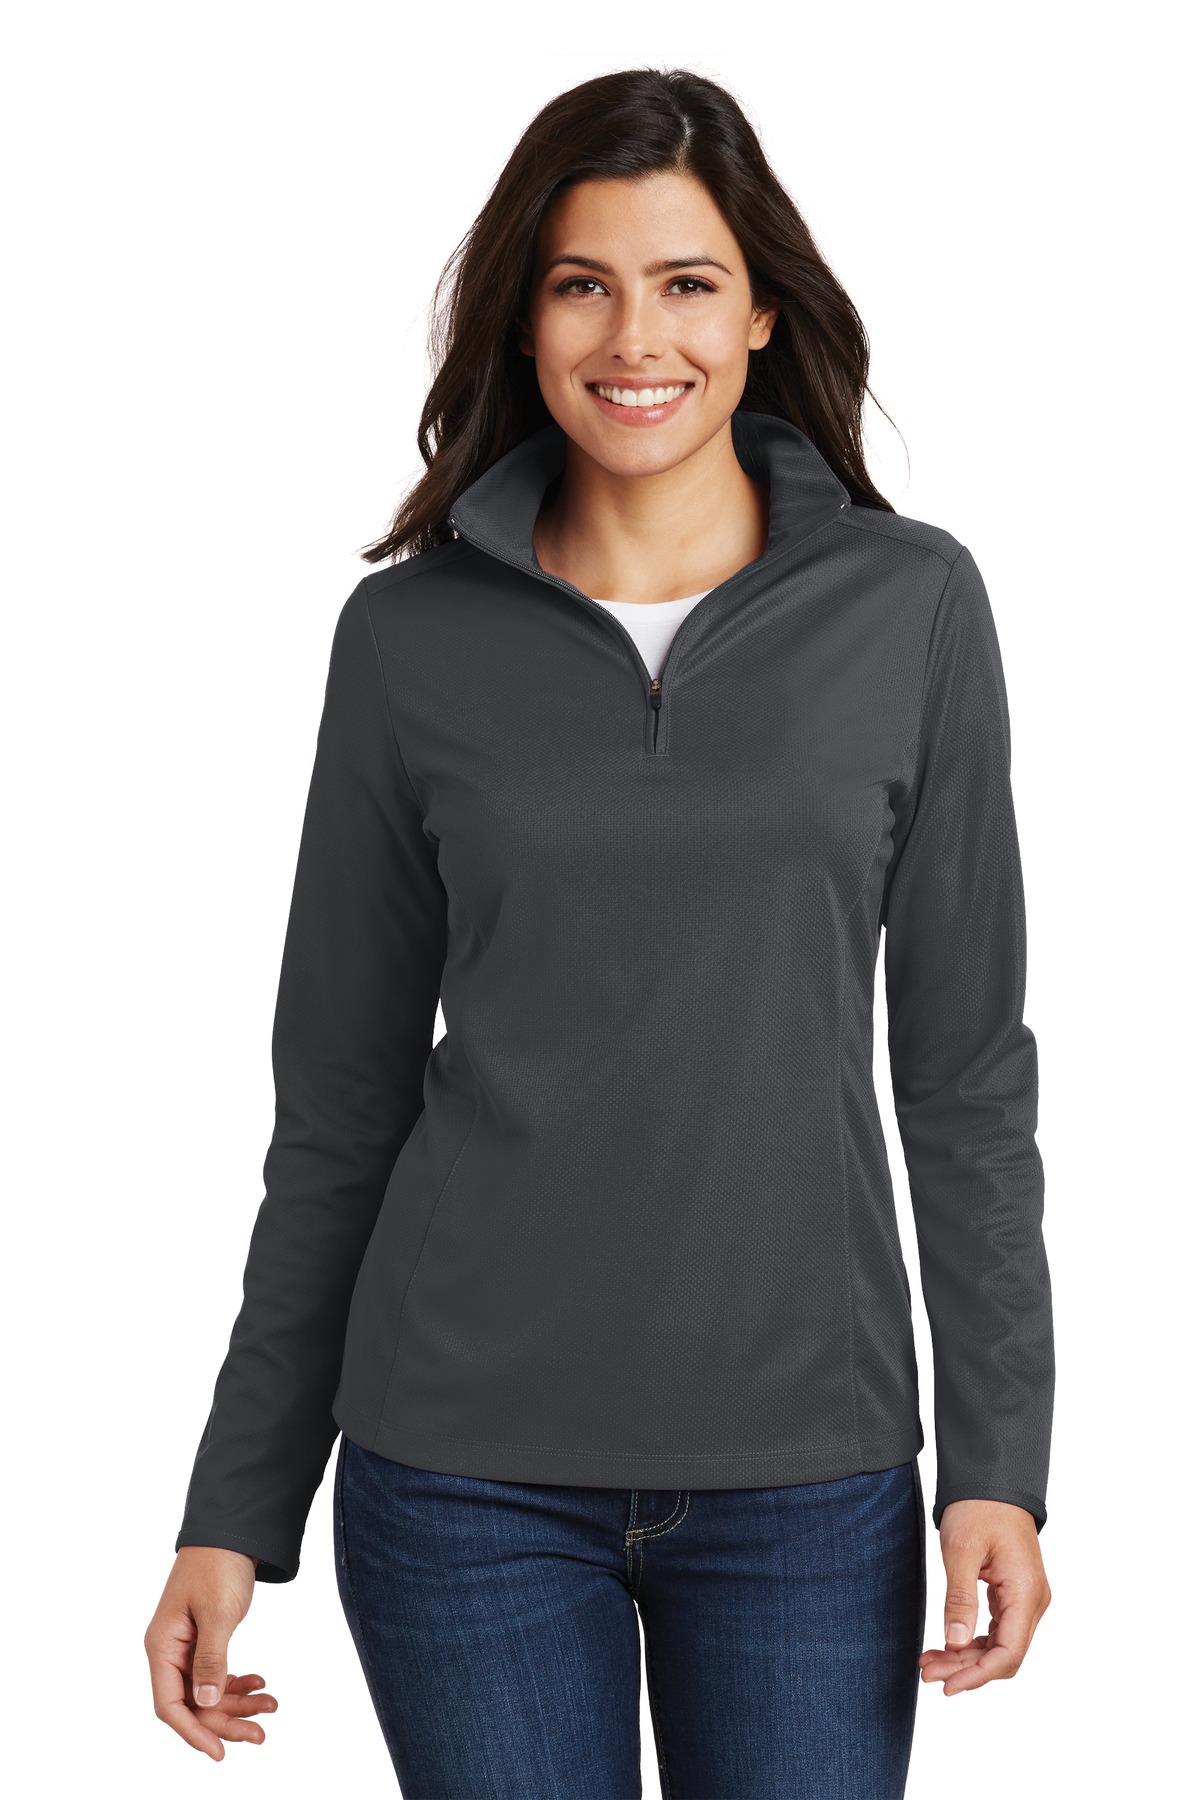 Port Authority Hospitality LadiesActivewear Polos&Knits ® Ladies Pinpoint Mesh 1/2-Zip .-Port Authority